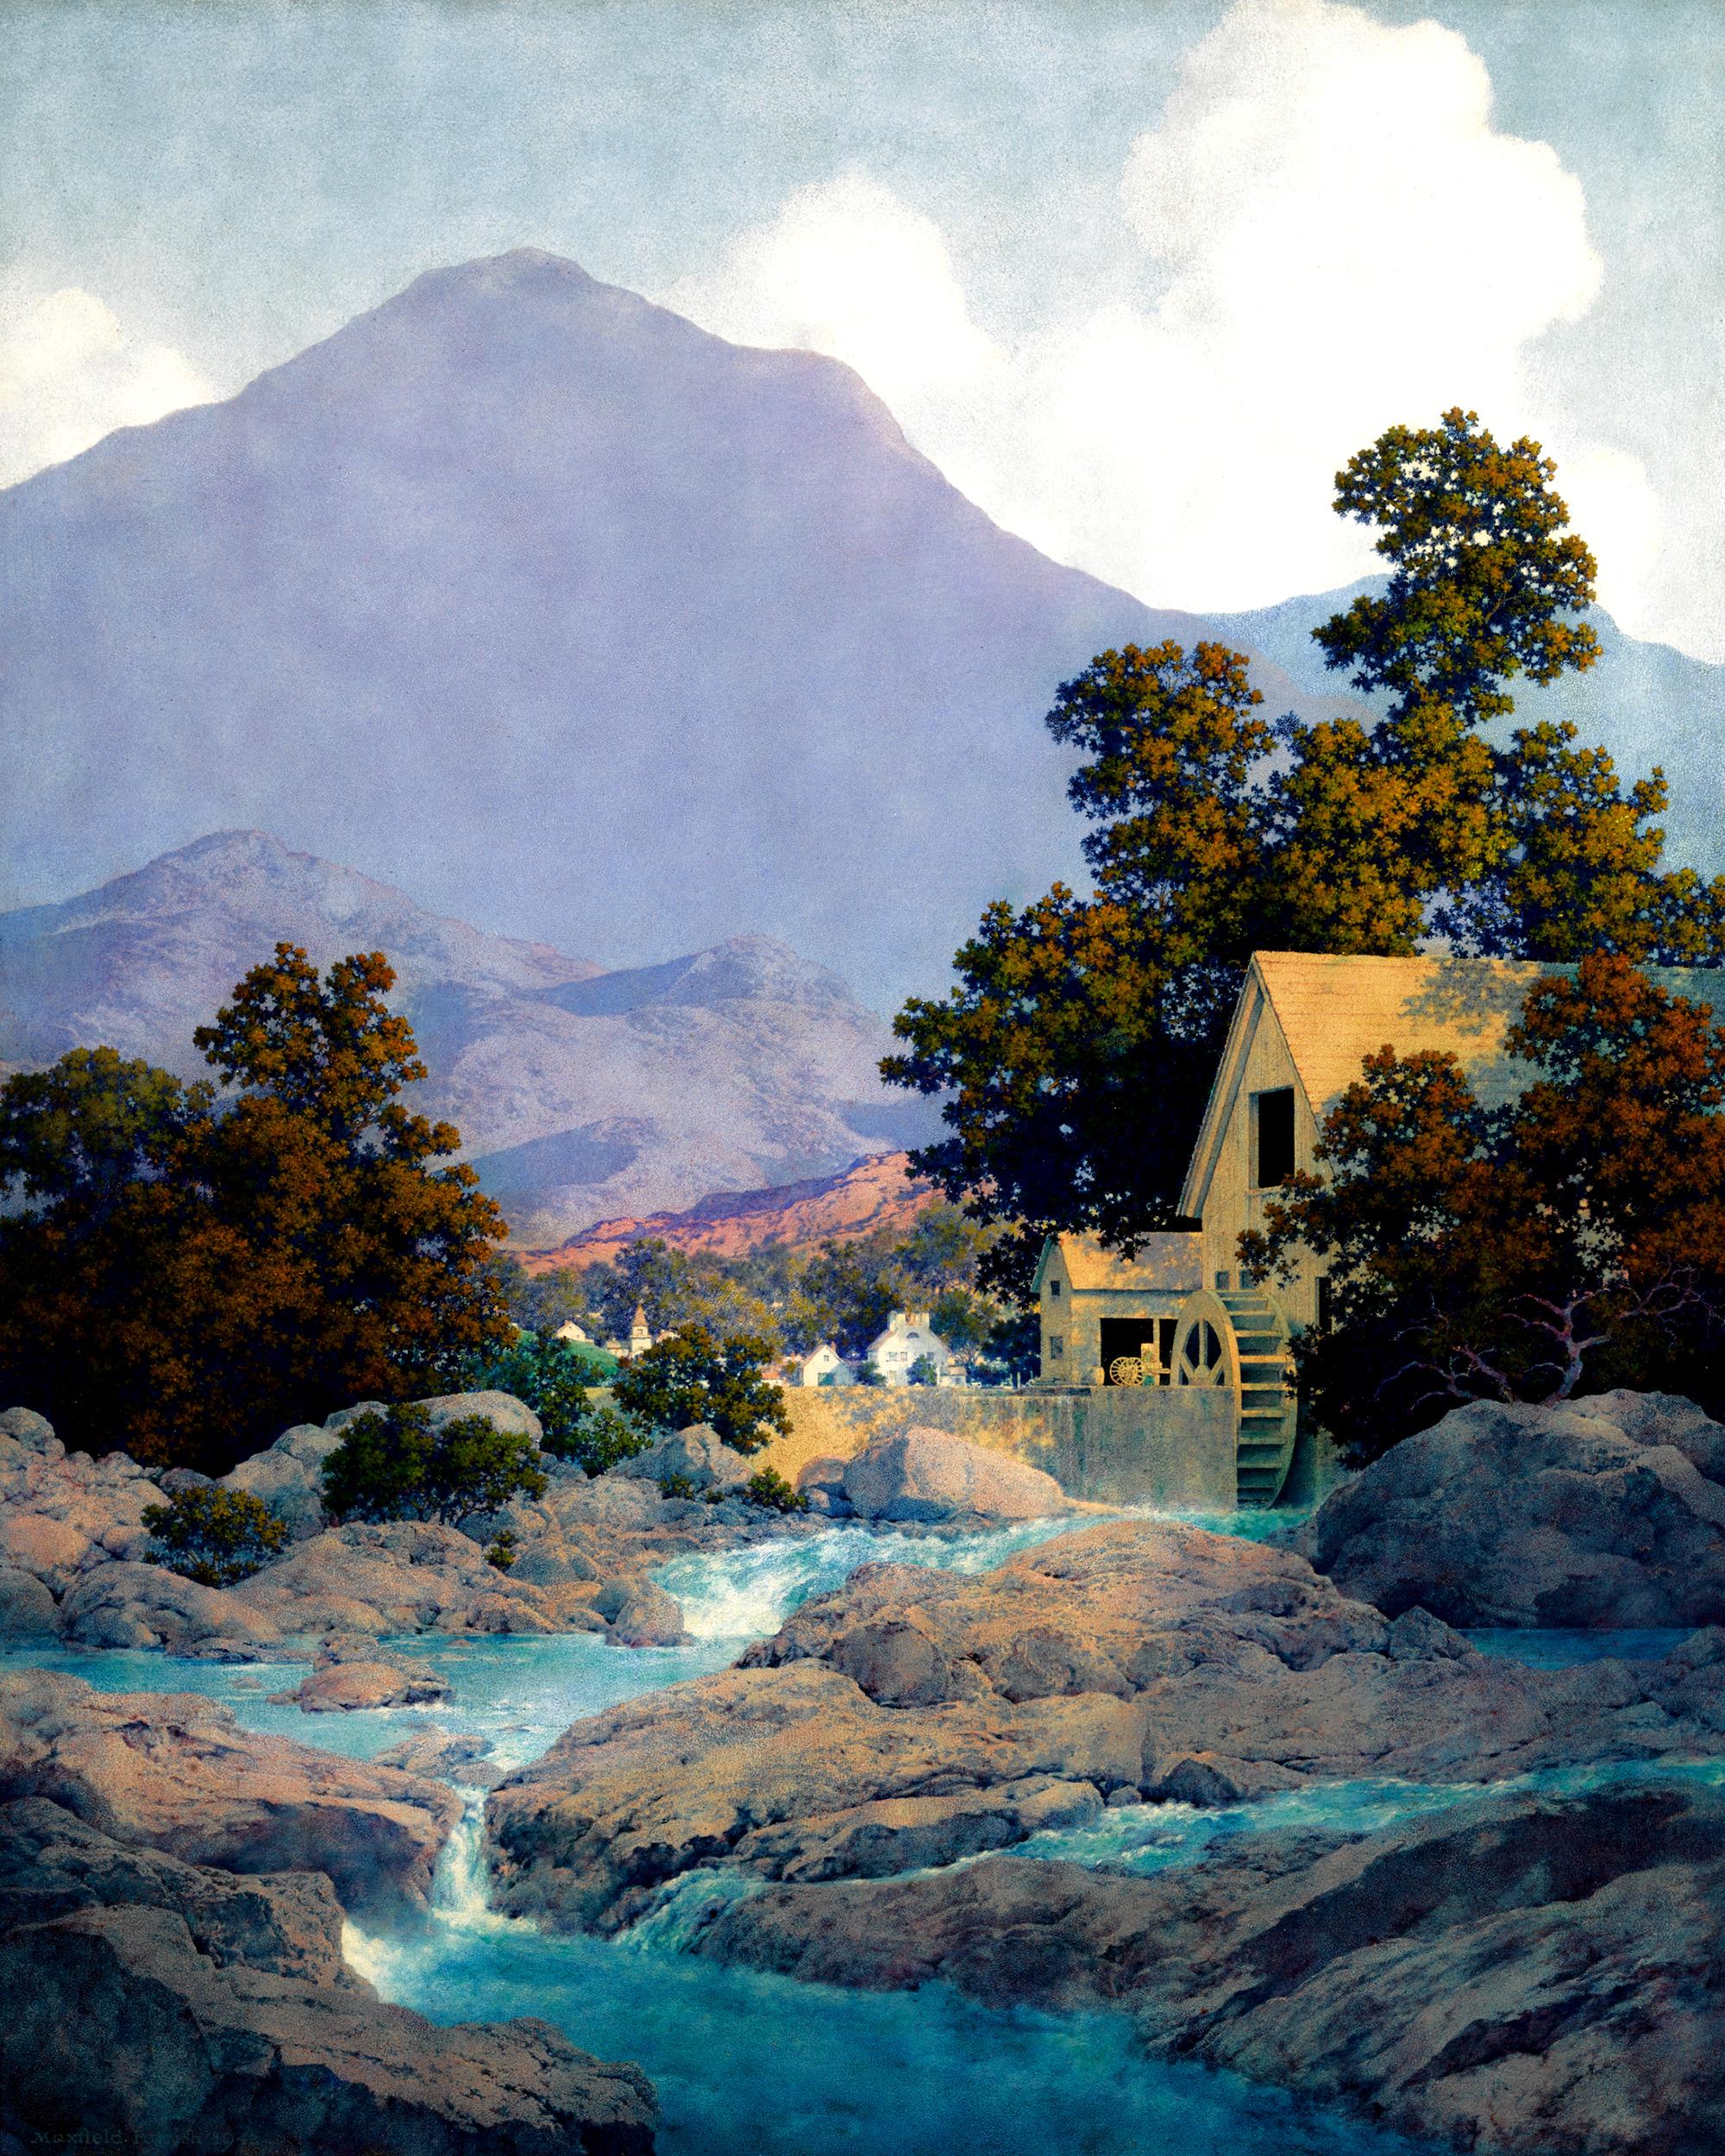 Maxfield Parrish
1870 - 1966  American

The Old Mill

Signed and dated "Maxfield Parrish 1942" (lower left); Titled, signed and dated "The Old Mill / Maxfield Parrish / 1942" (en verso)
Oil on Masonite

Maxfield Parrish is remembered today as one of